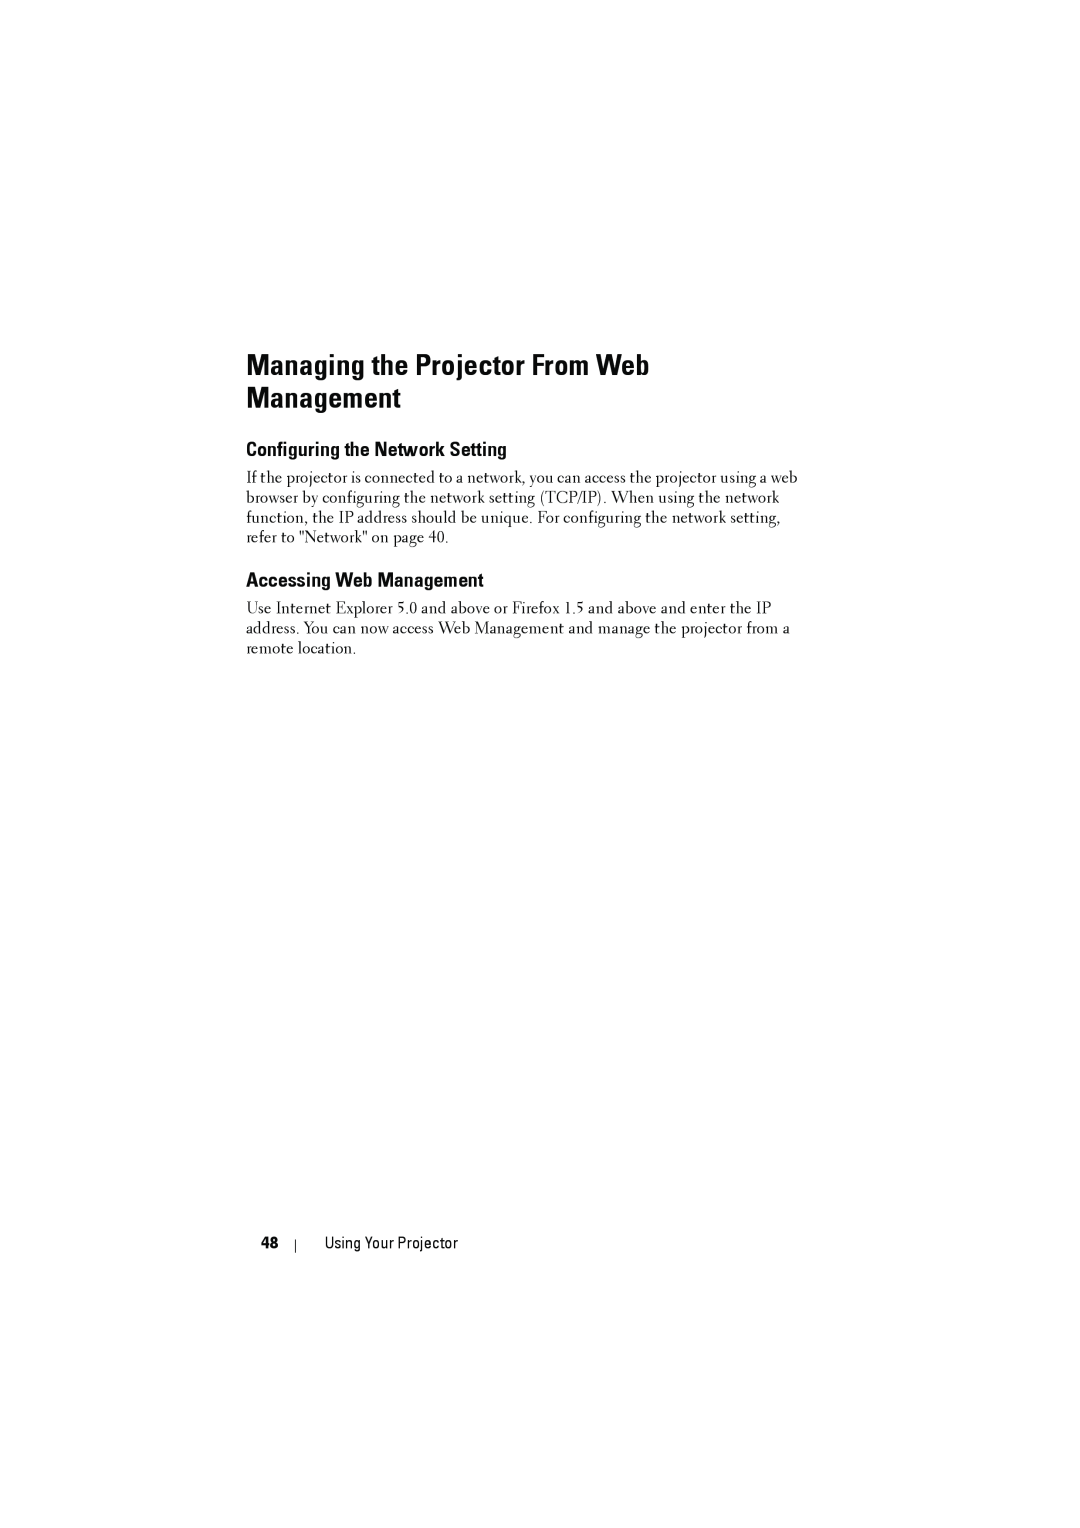 Dell 1610HD manual Managing the Projector From Web Management, Configuring the Network Setting, Accessing Web Management 